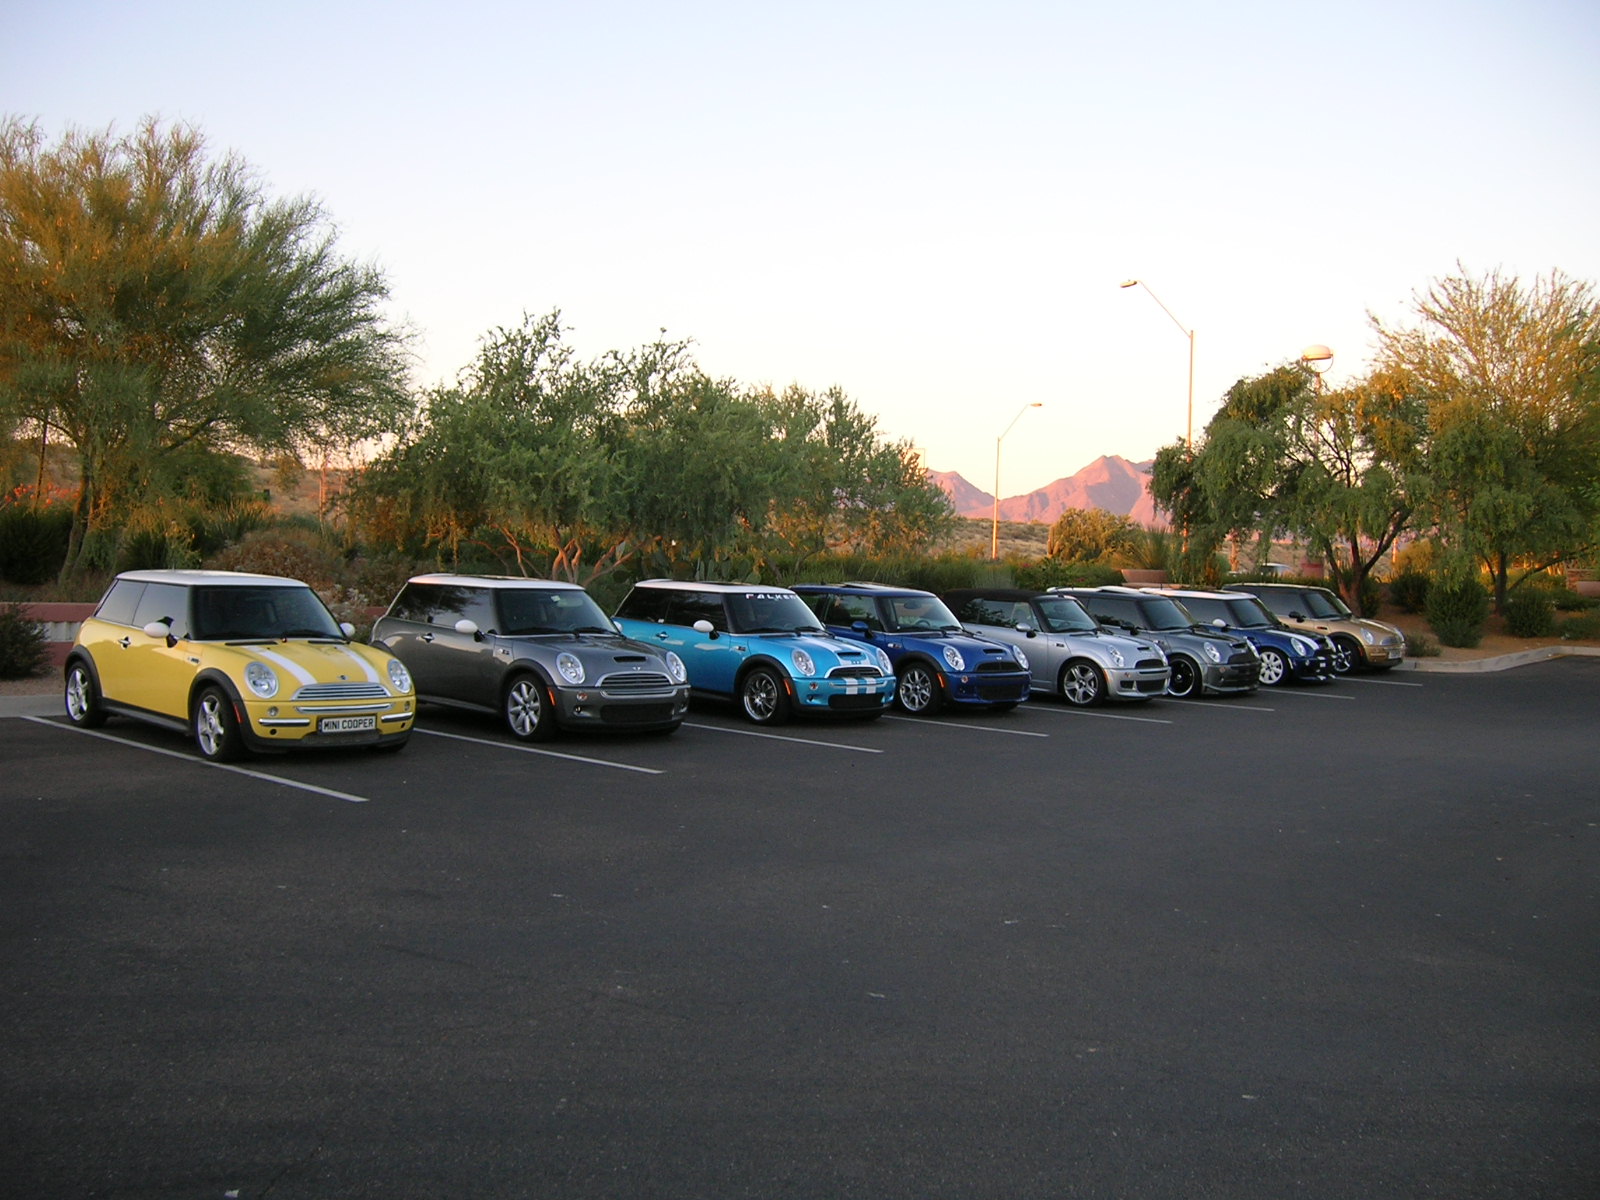 Some of the group from Dynamic Mini Collective in Phoenix, AZ